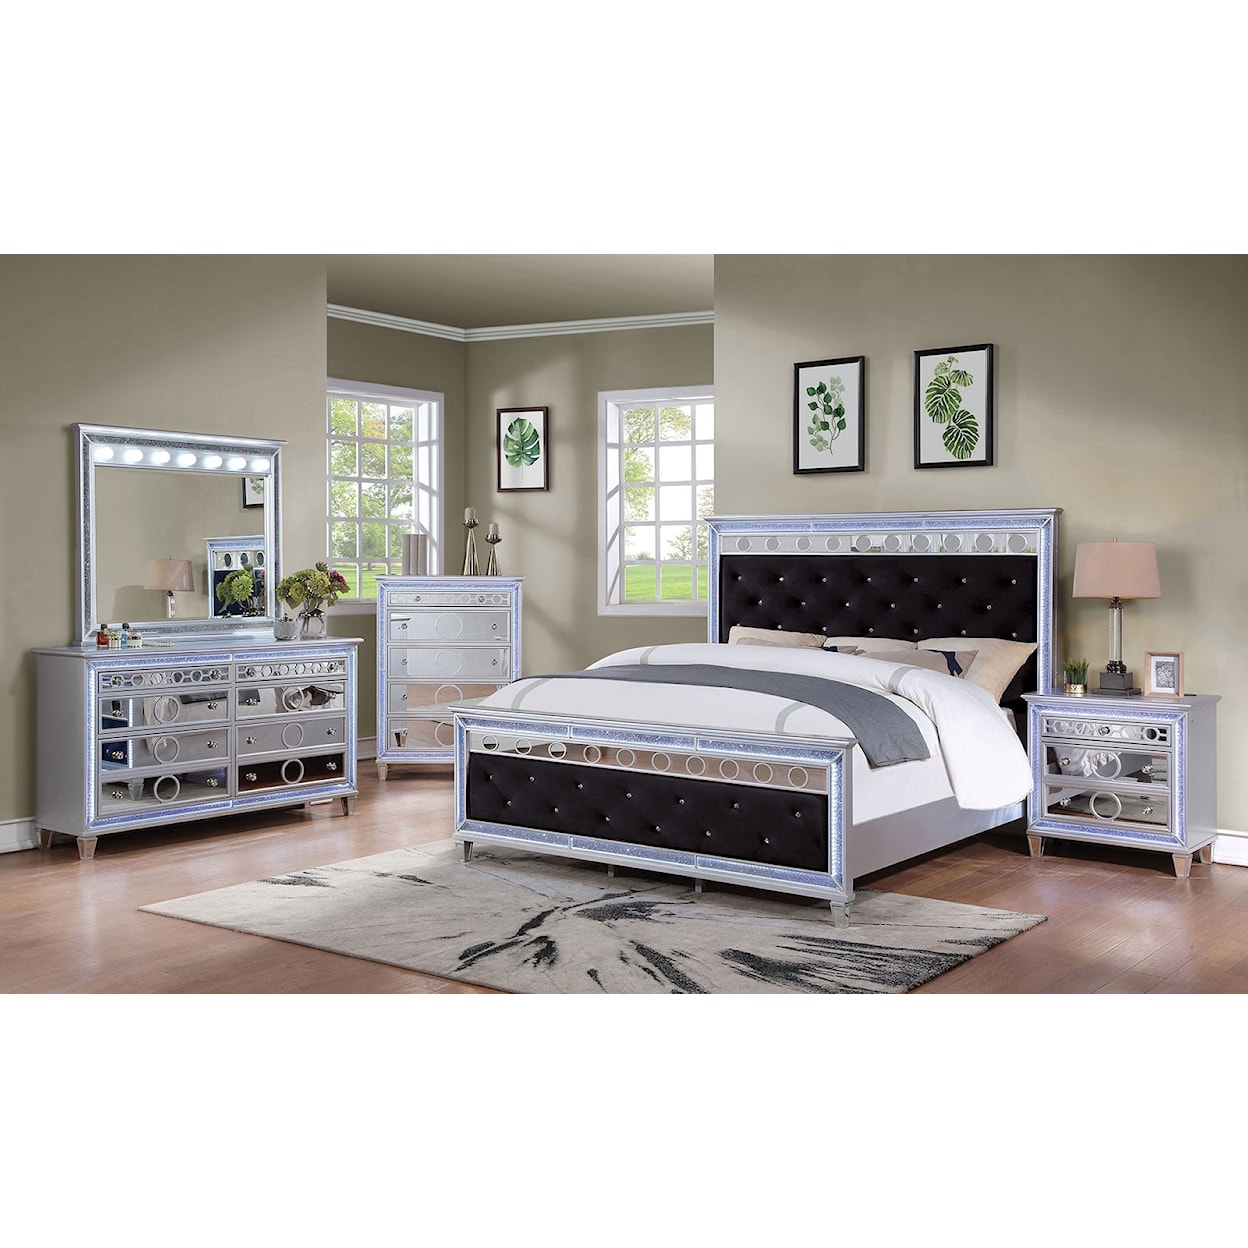 Furniture of America Mairead Upholstered Queen Bed with LED Lighting